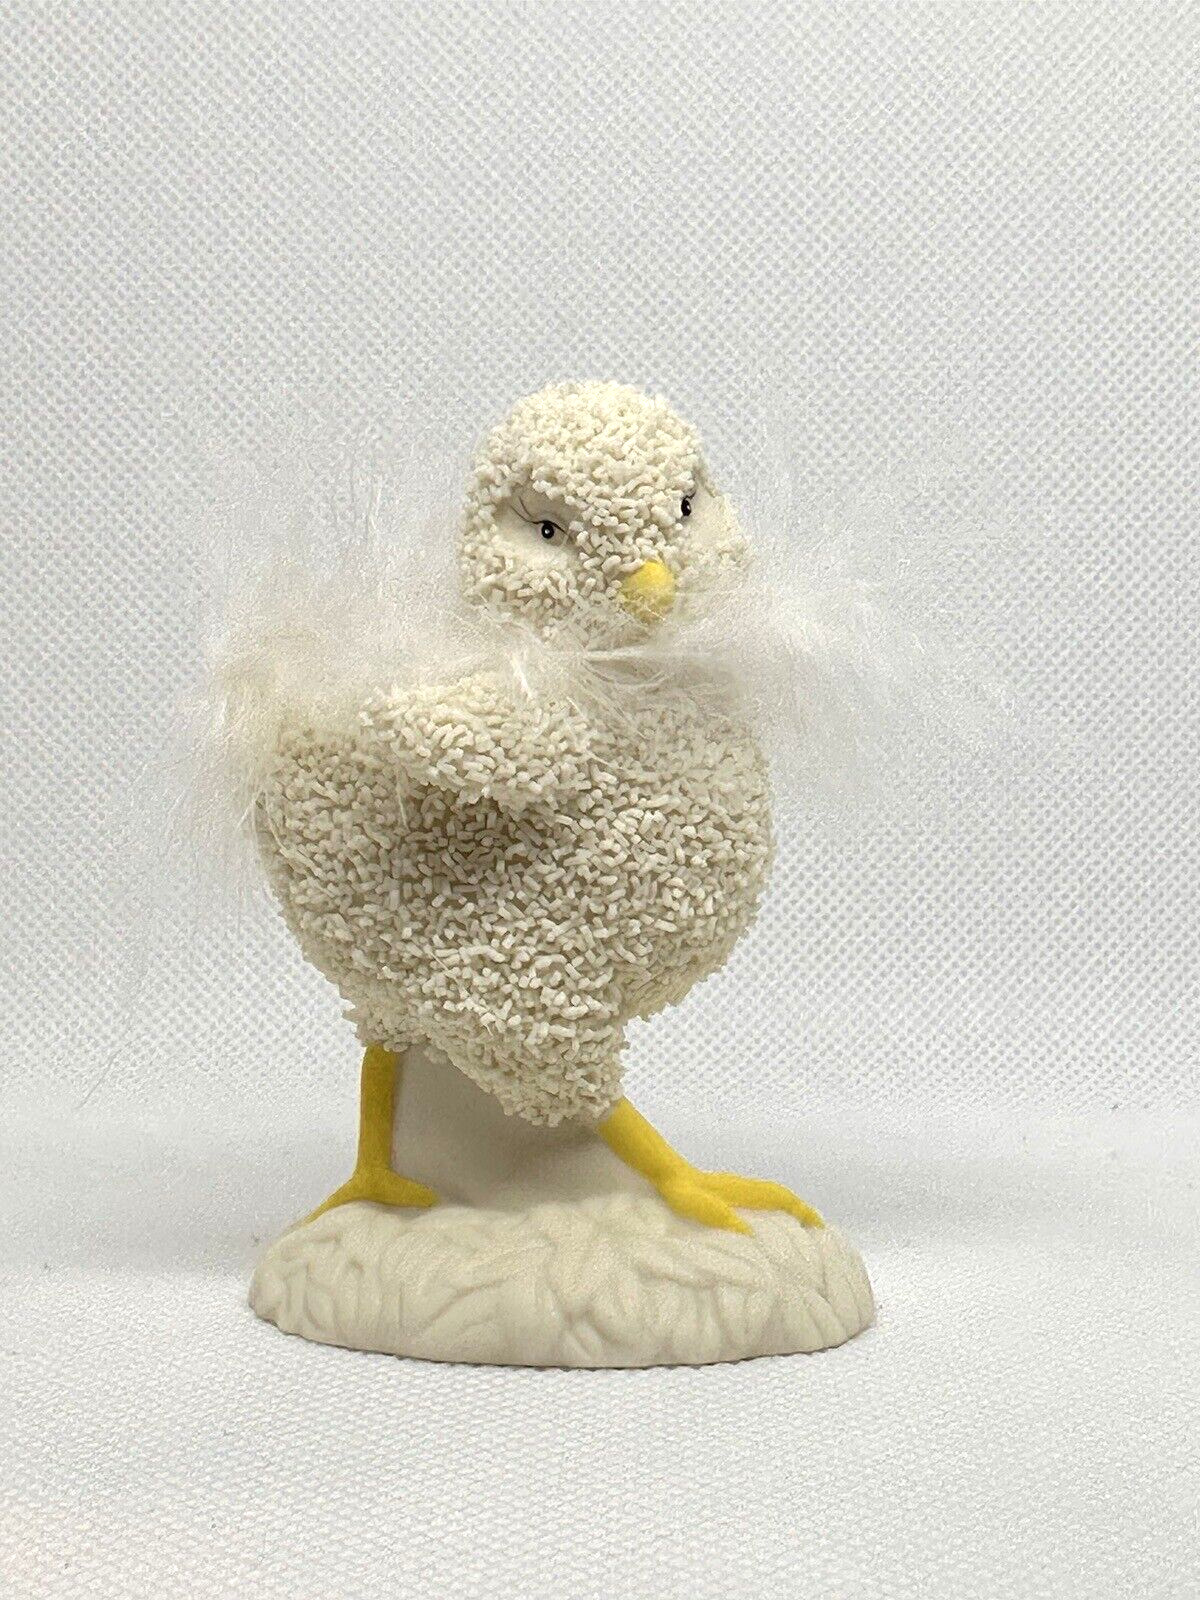 2006 Dept 56 Butterfly Garden Chick Figurine with Feather Boa Accessory